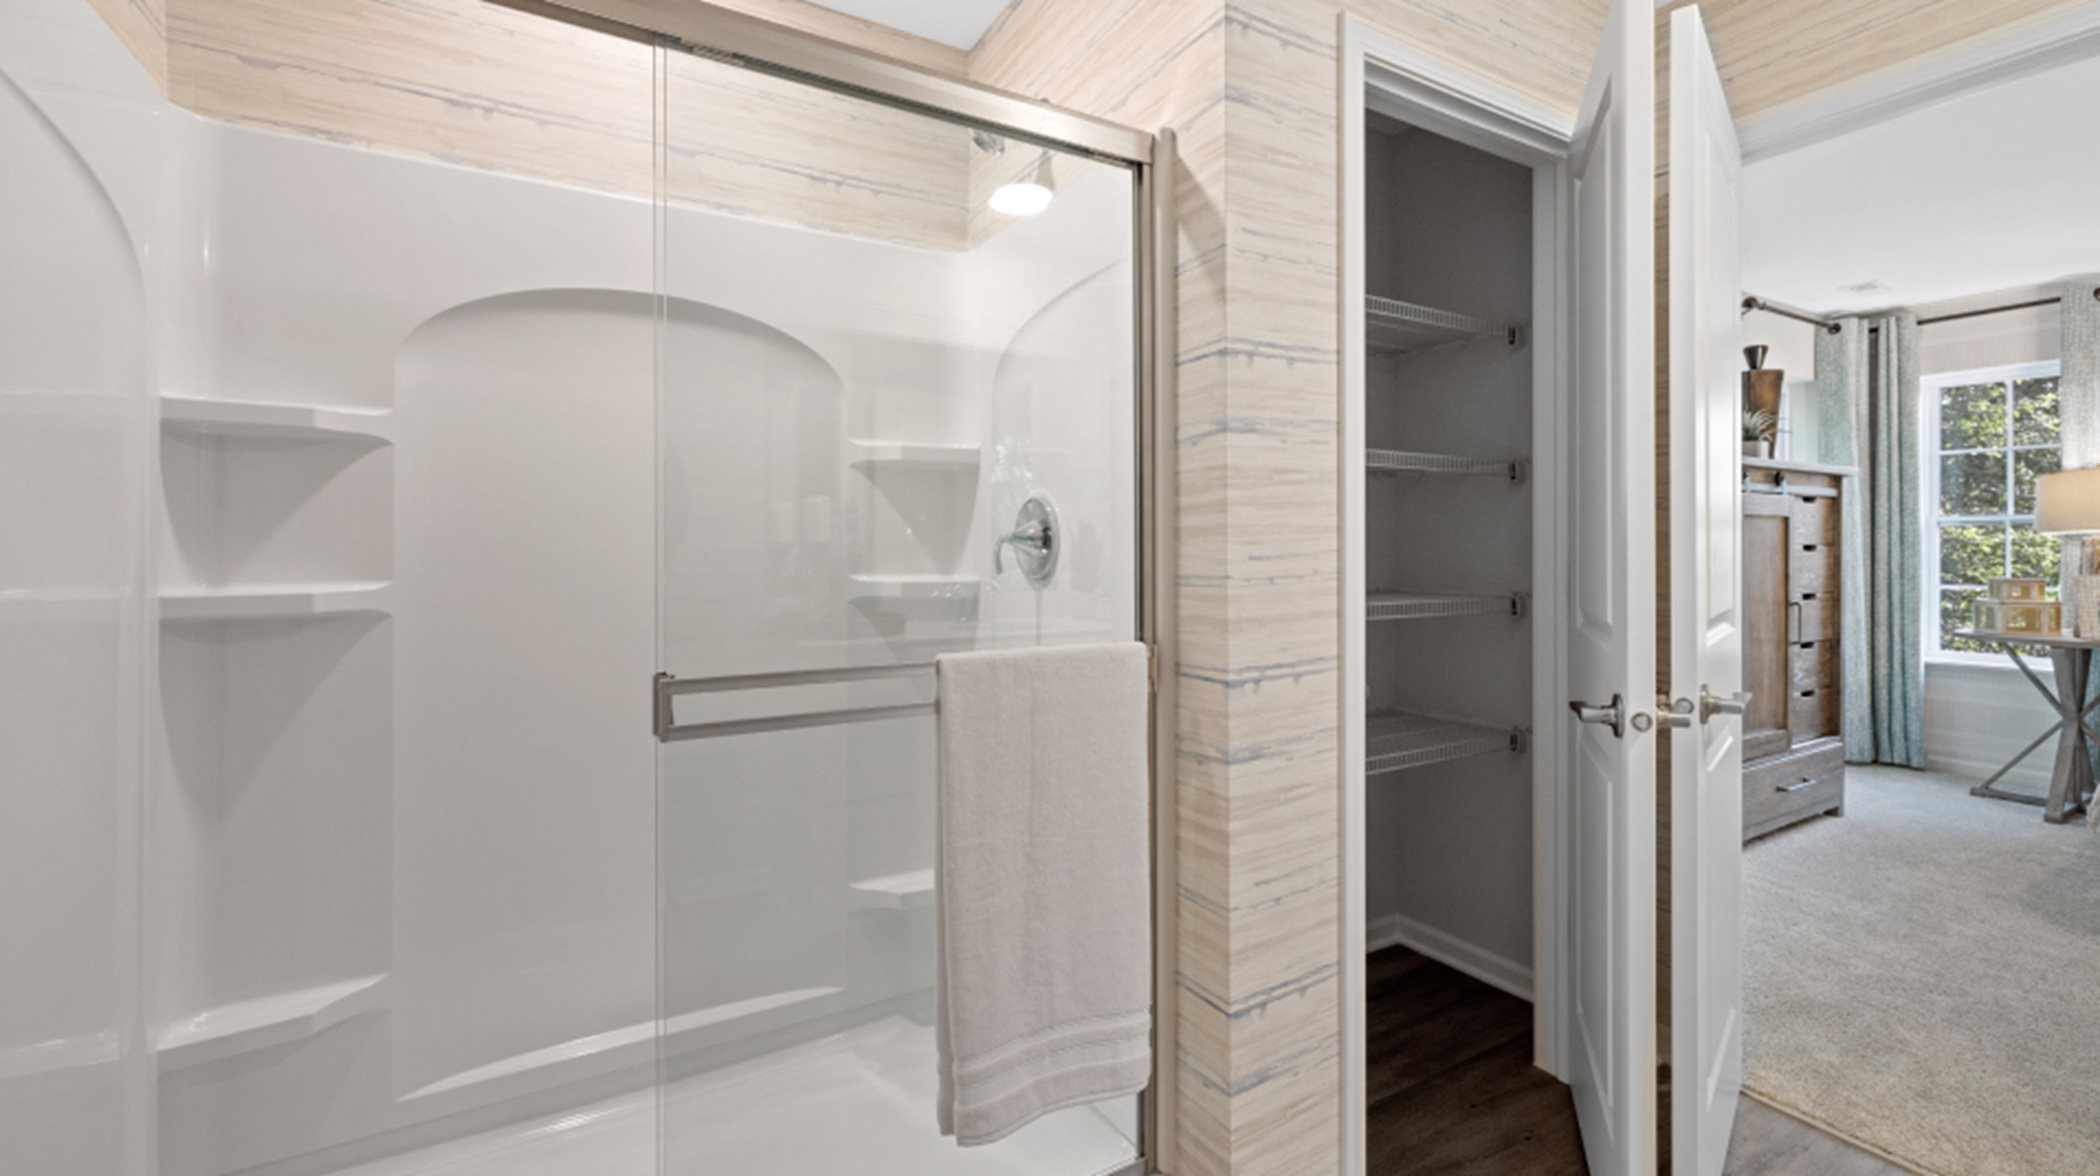 Owners Bathroom Fiberglass shower with clear glass door, brushed nickel trim and built-in shelving